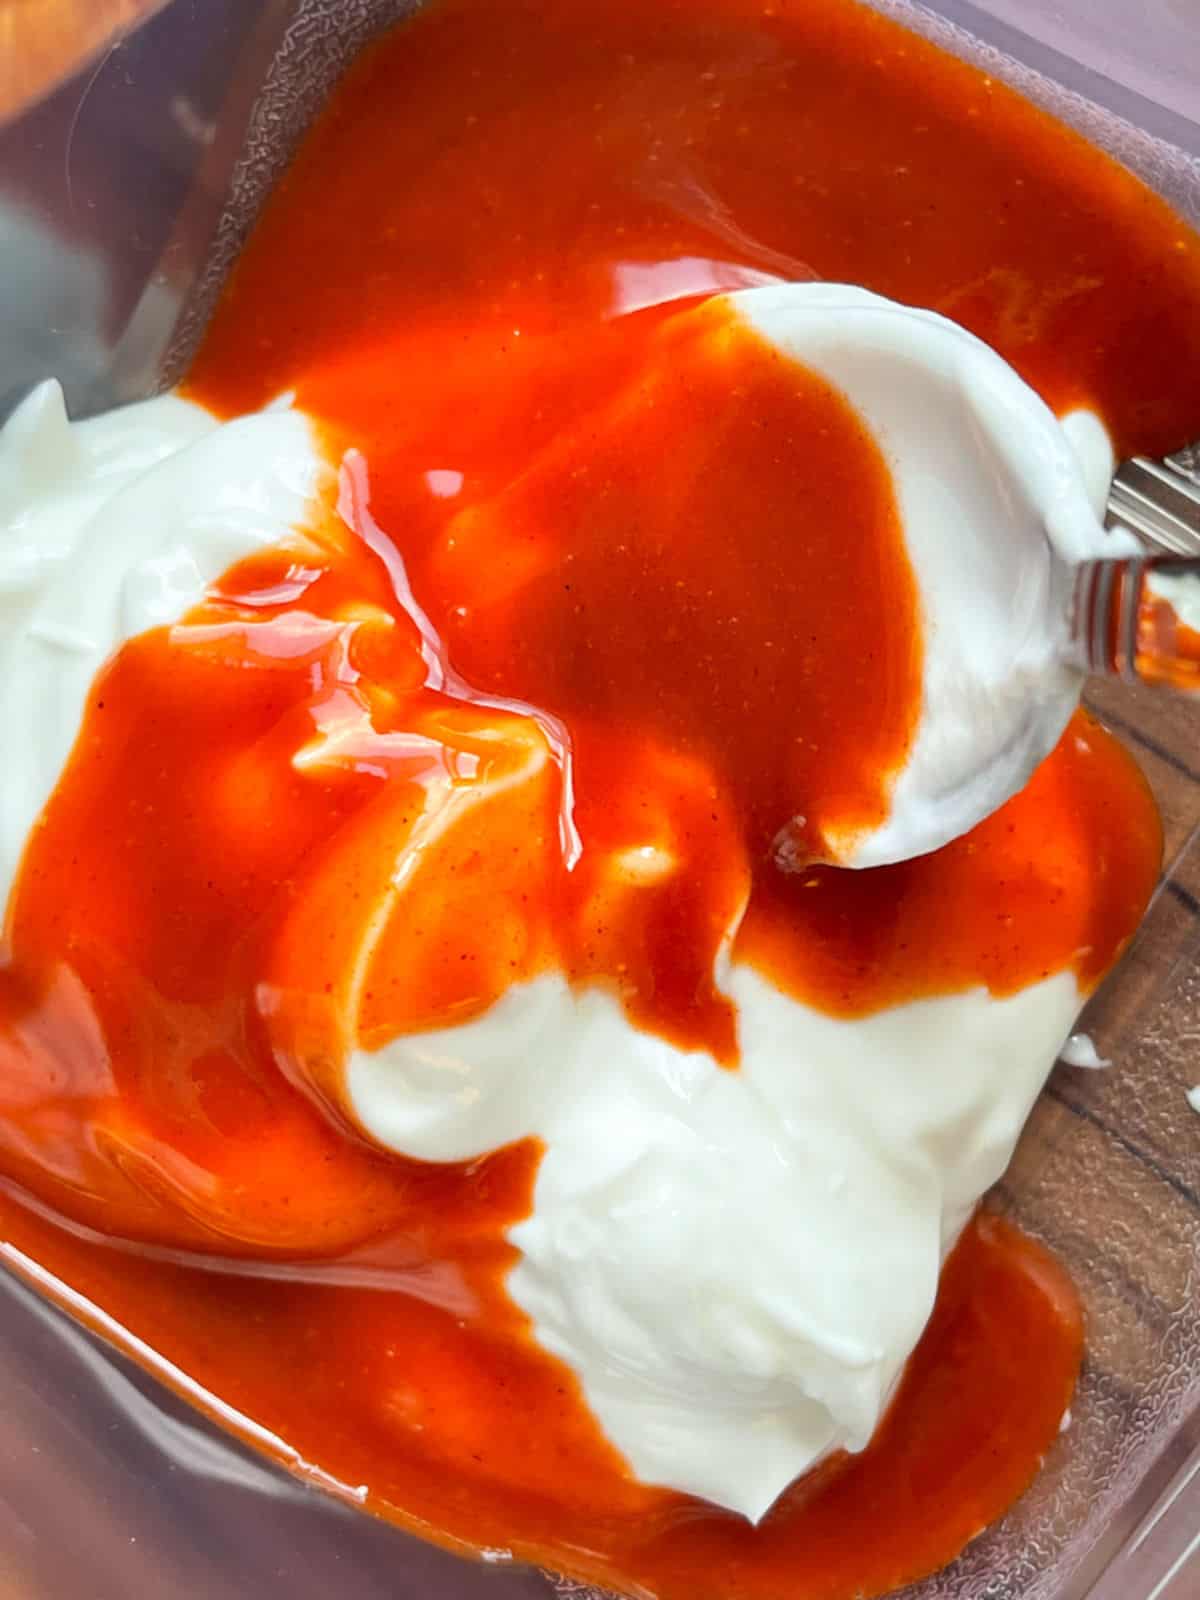 A clear bowl of greek yogurt with red buffalo sauce poured on top ready to mix the sauce.